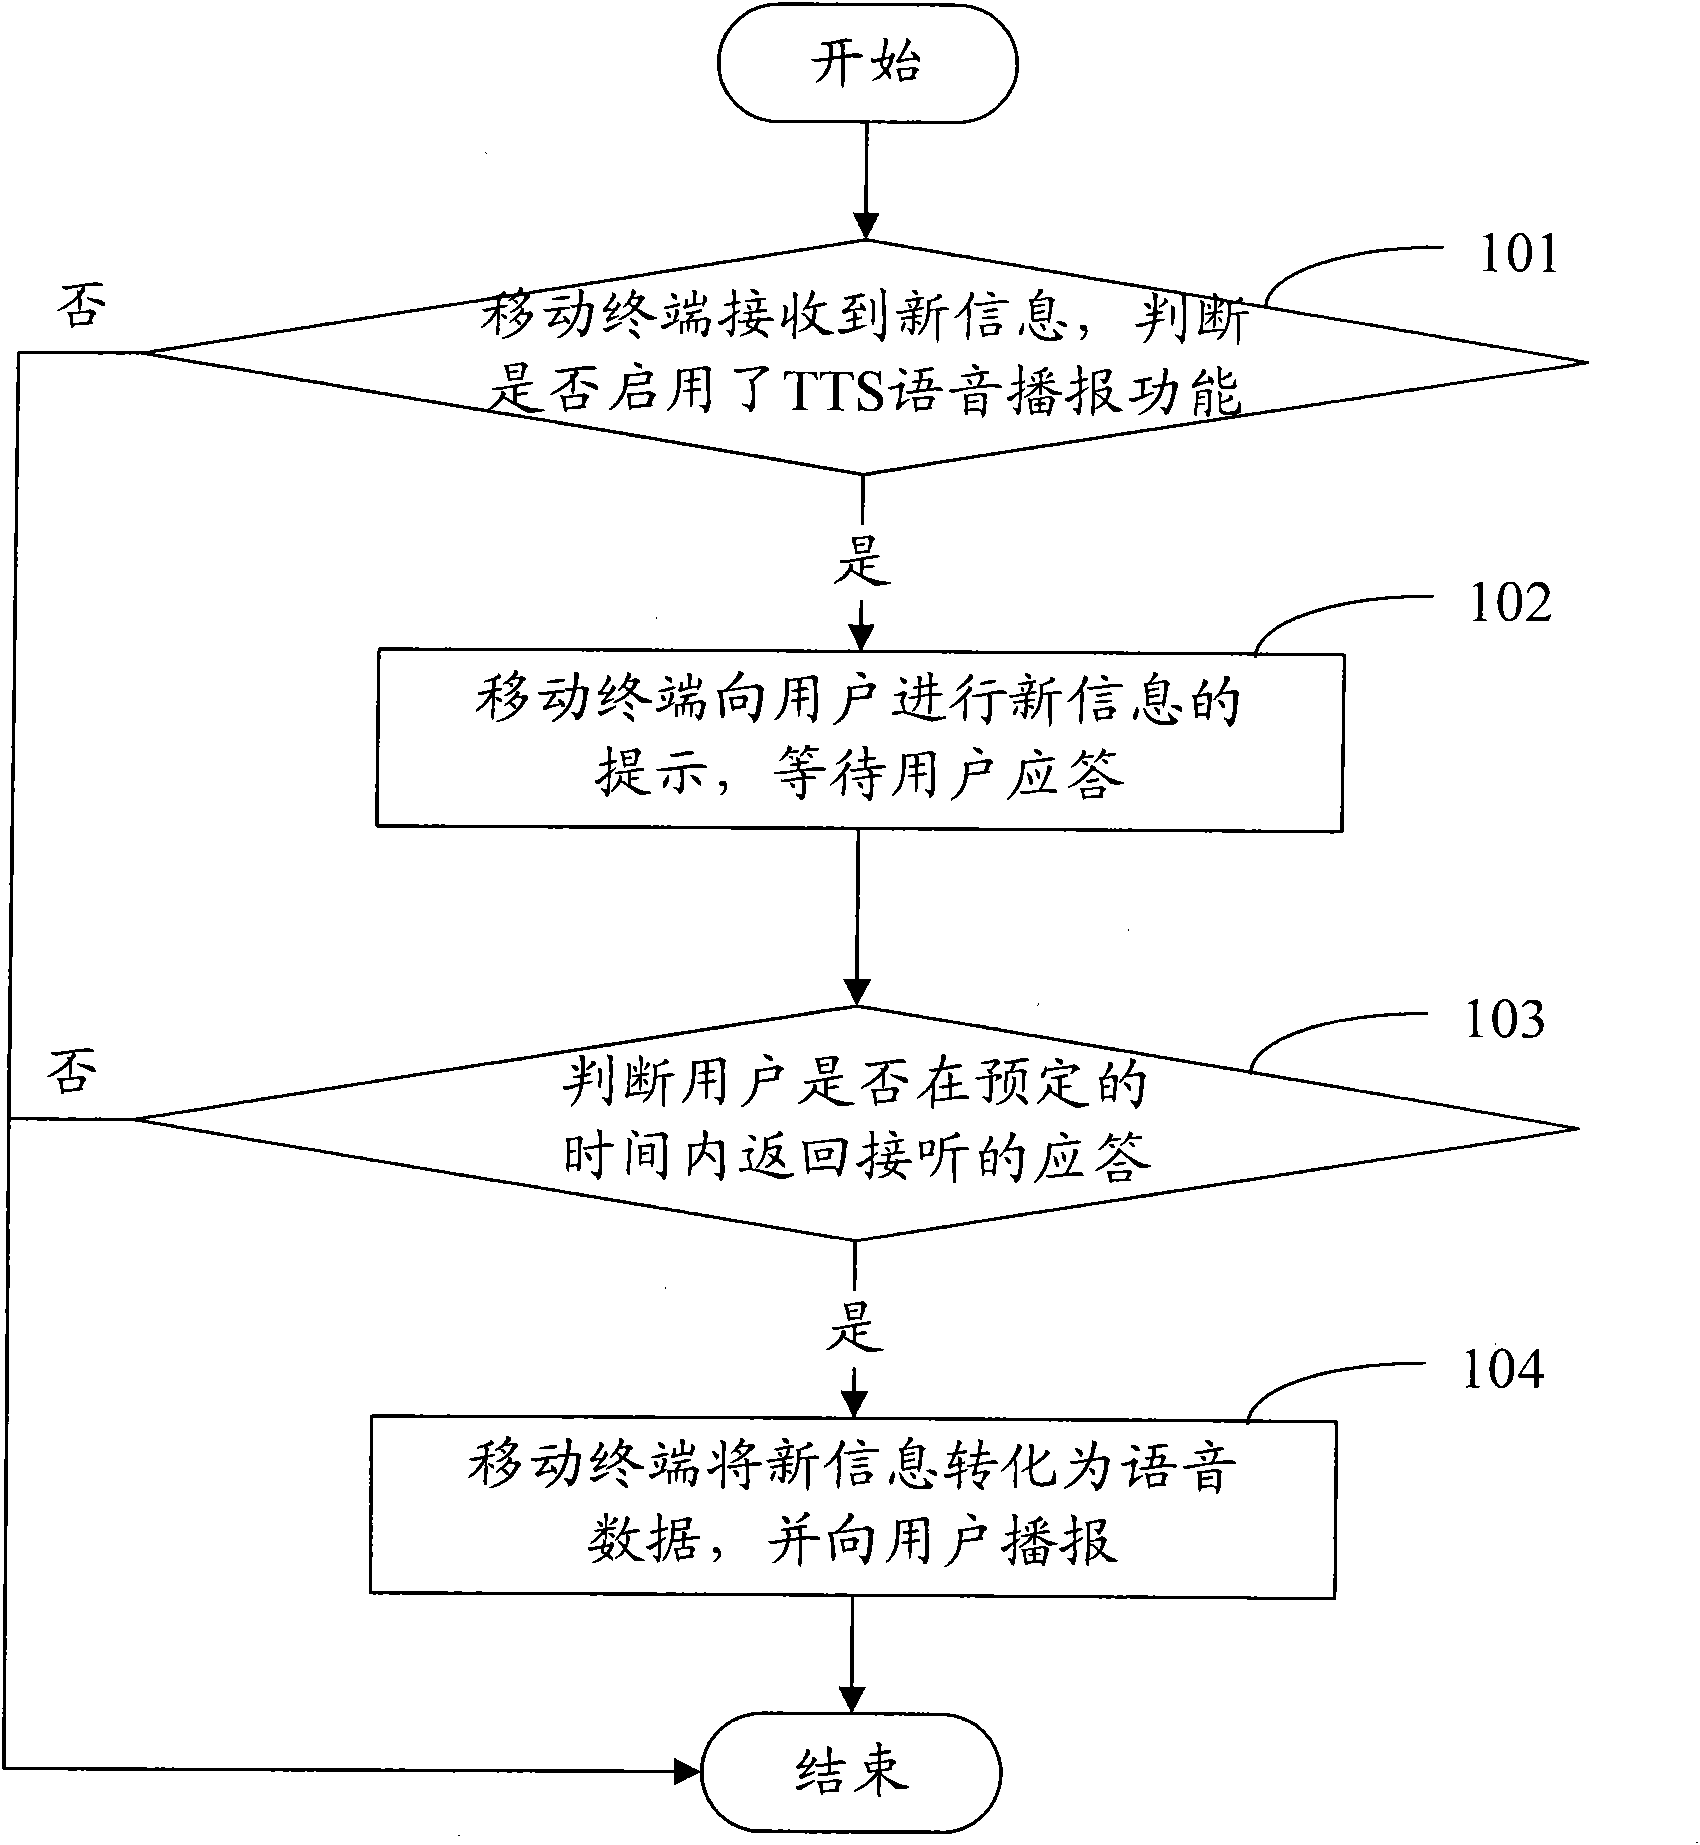 Mobile terminal and method for mobile terminal to achieve voice broadcast function